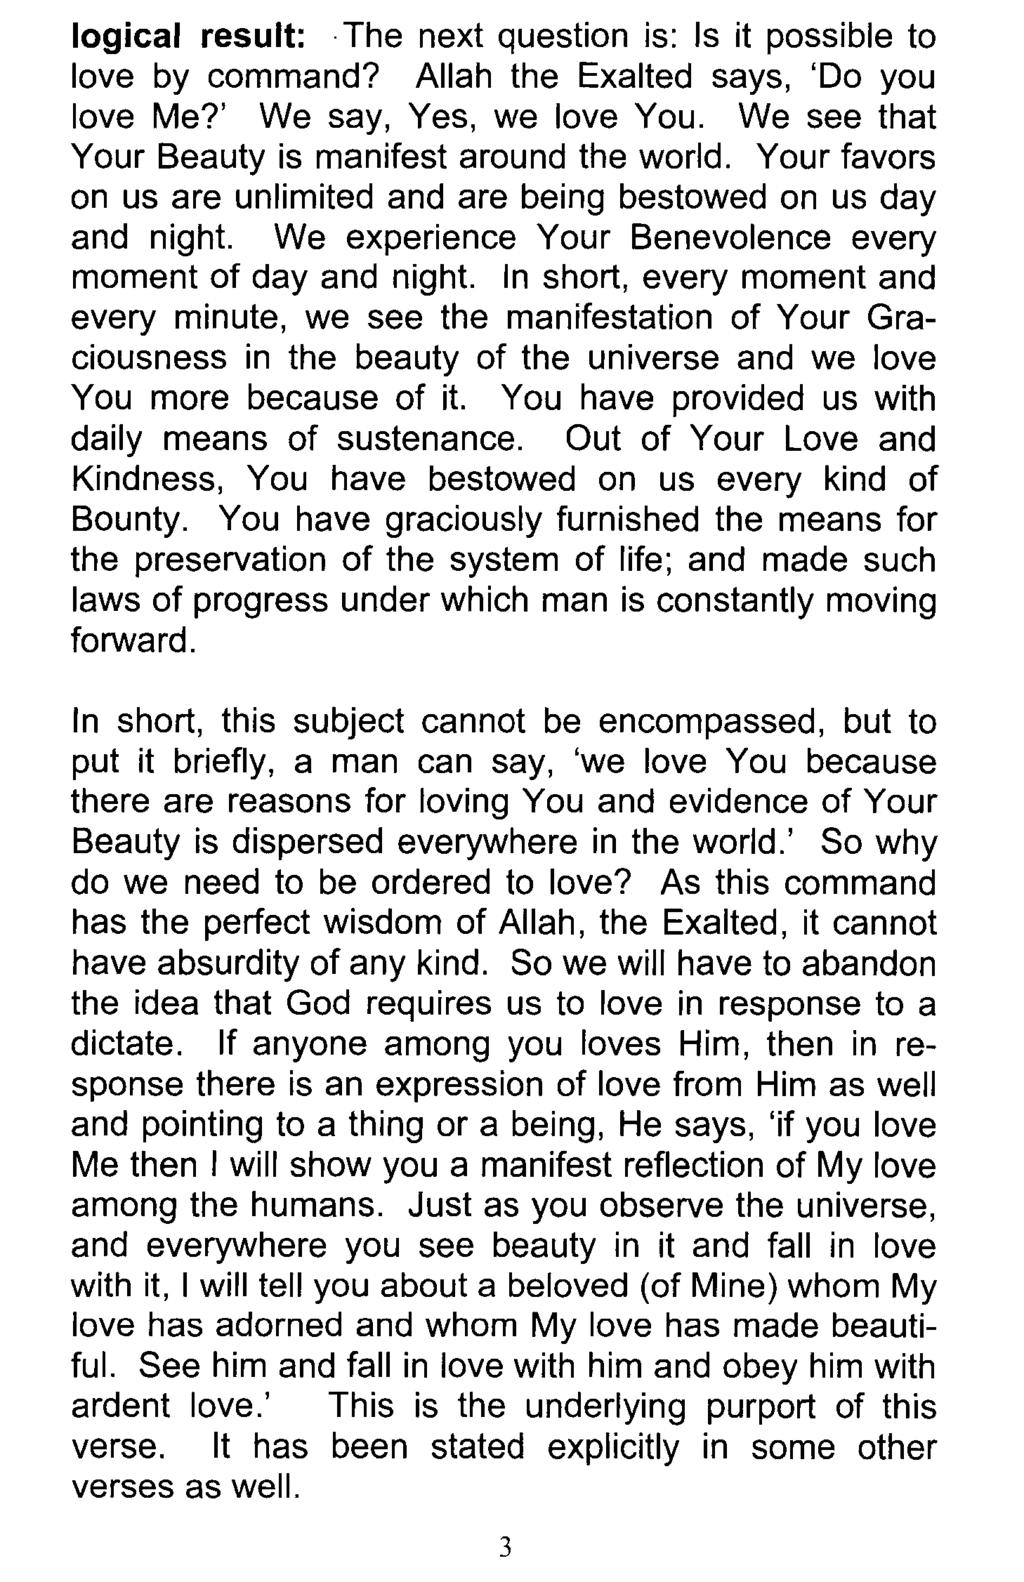 logical result:. The next question is: Is it possible to love by command? Allah the Exalted says, 'Do you love Me?' We say, Yes, we love You. We see that Your Beauty is manifest around the world.